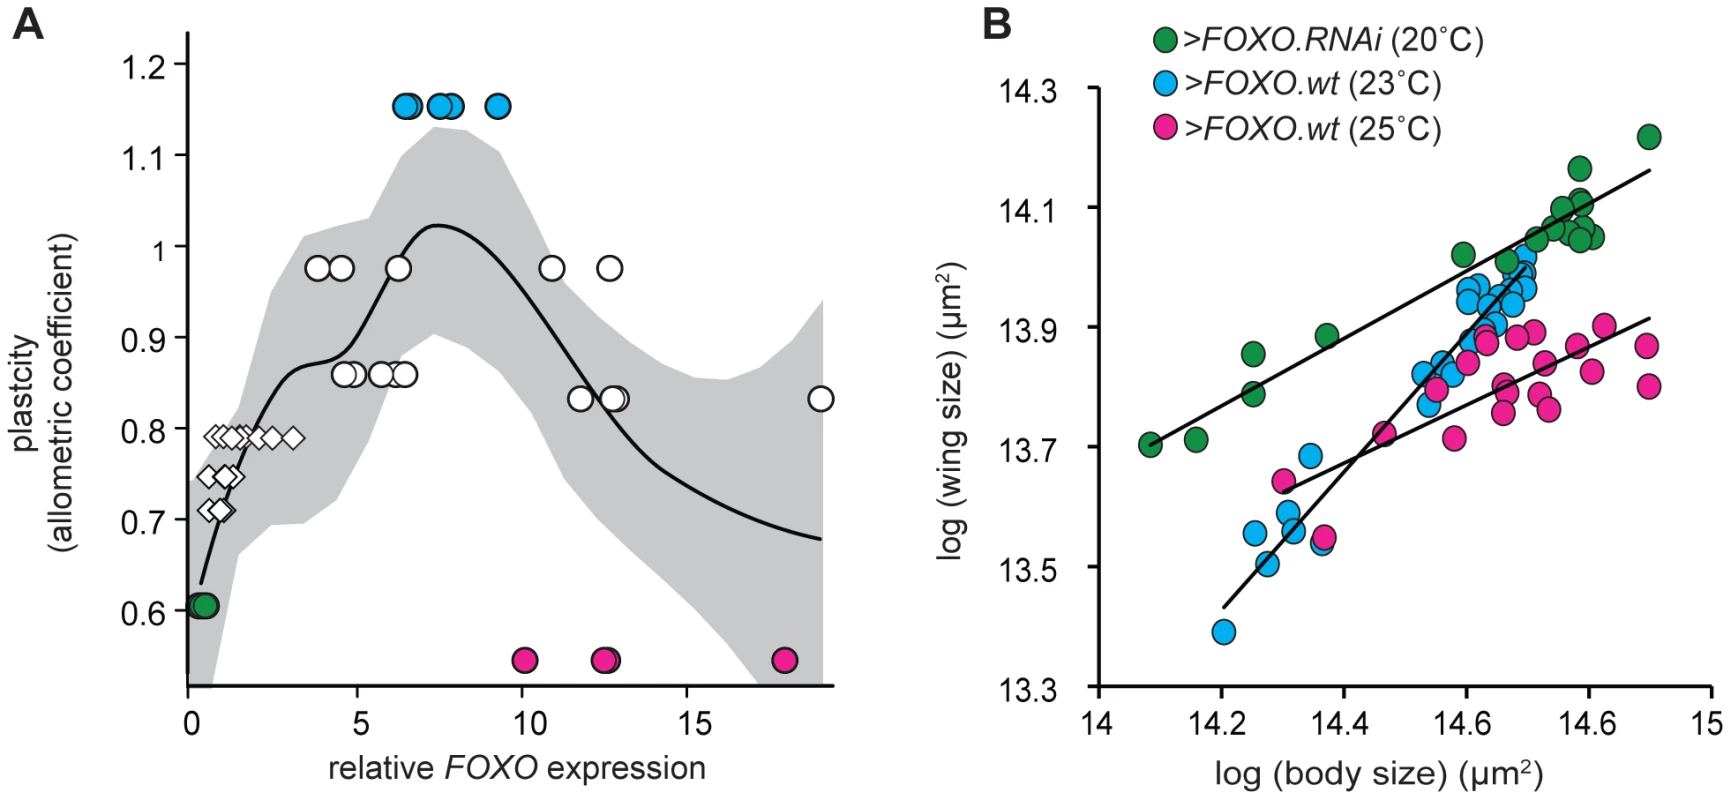 There is a non-linear relationship between <i>FOXO</i> expression and nutritional plasticity.